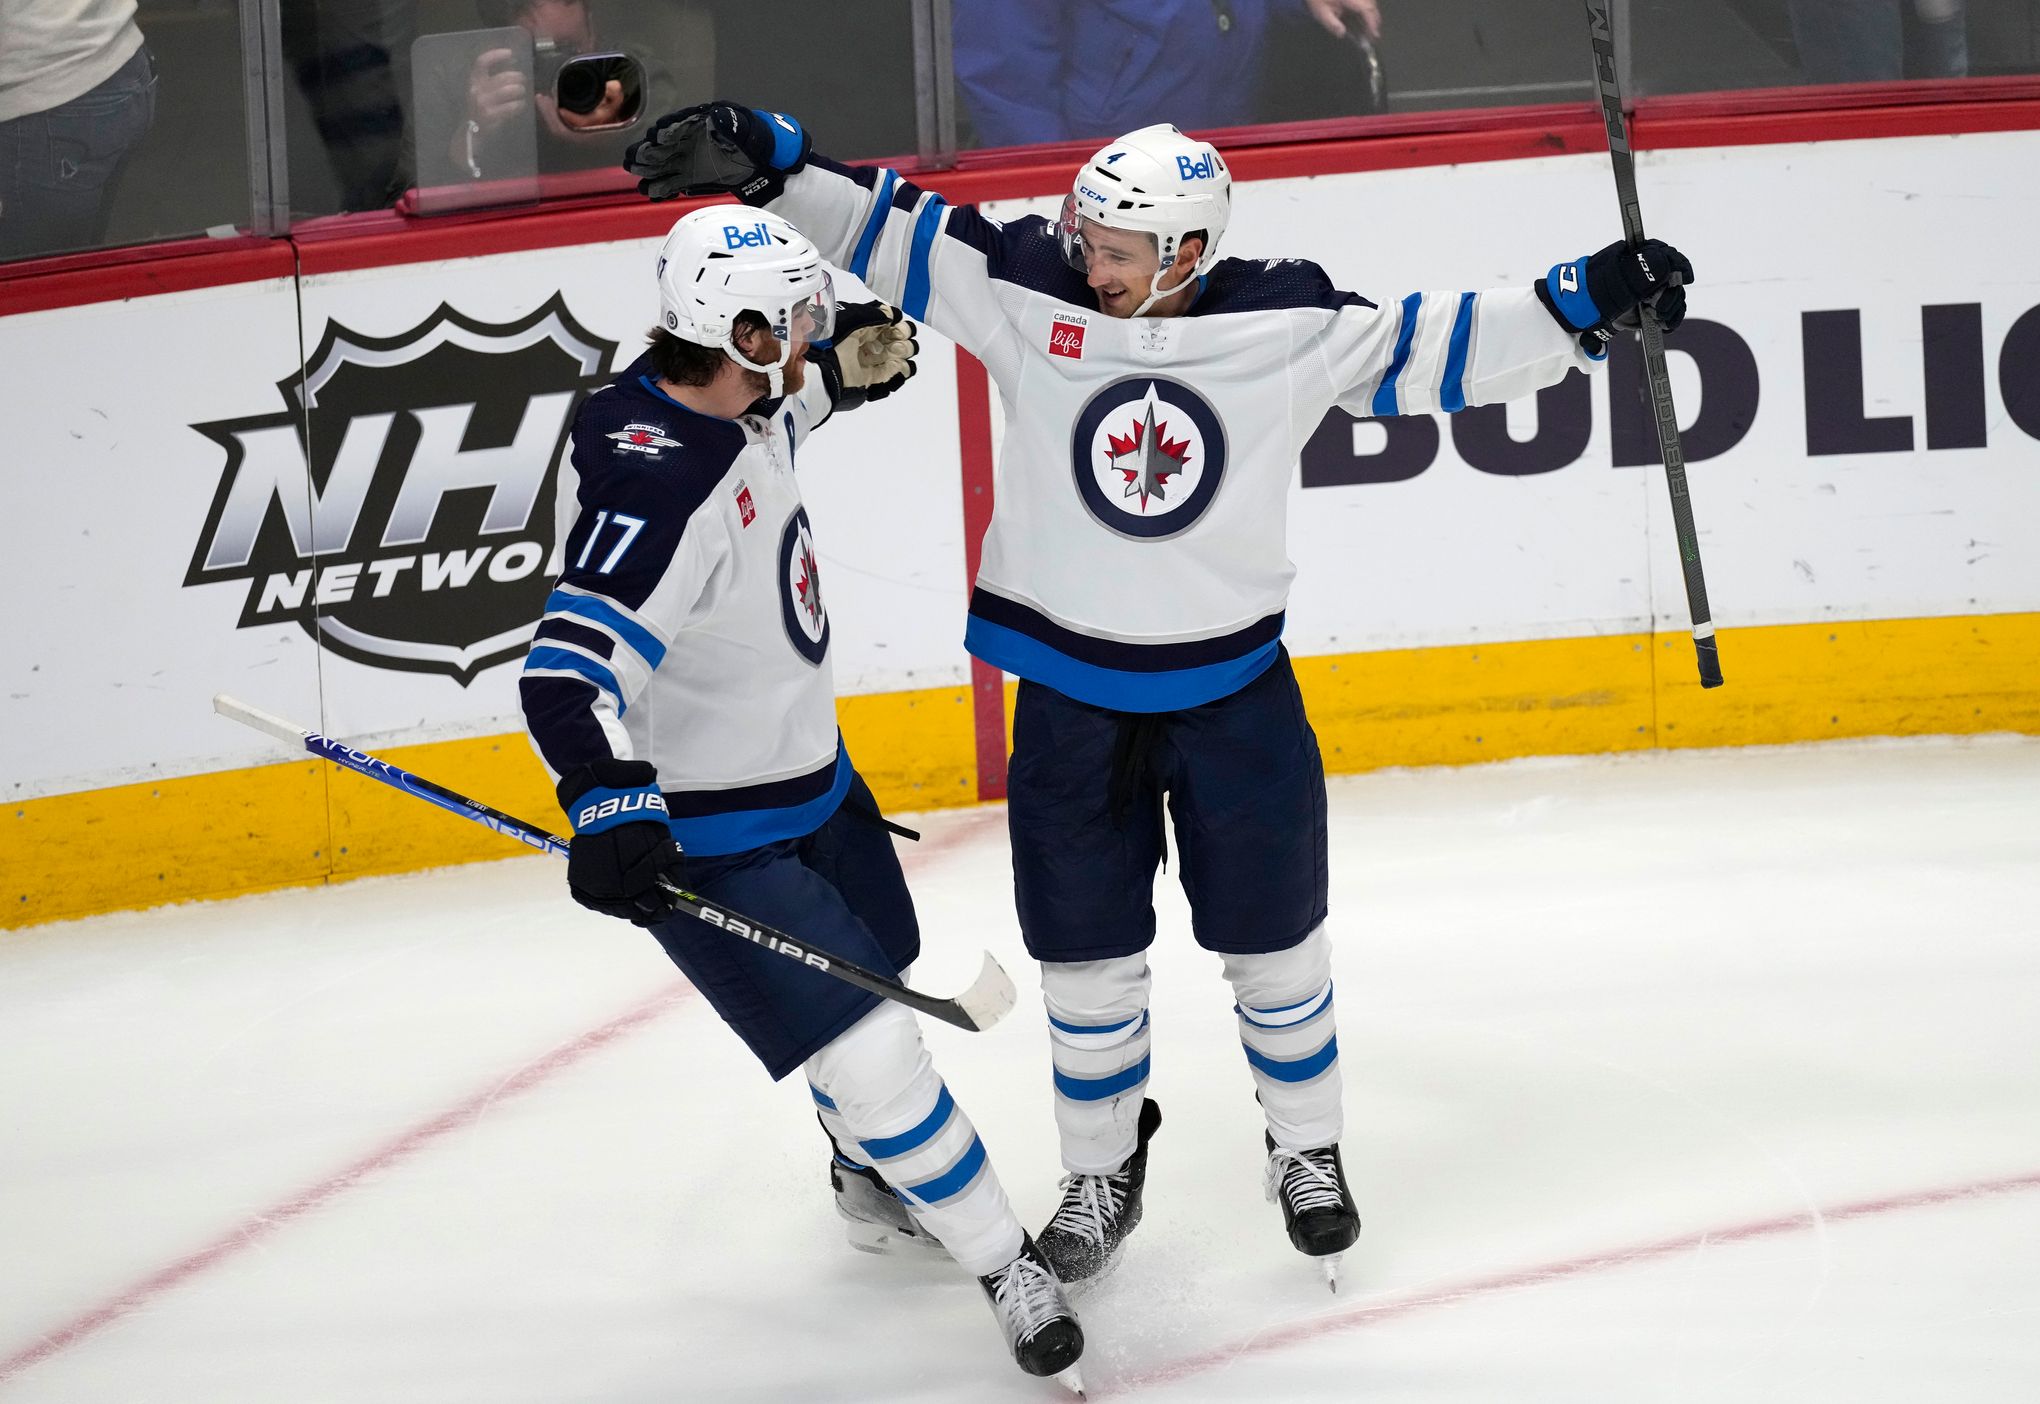 Jets make centre Adam Lowry new captain, third to wear 'C' in